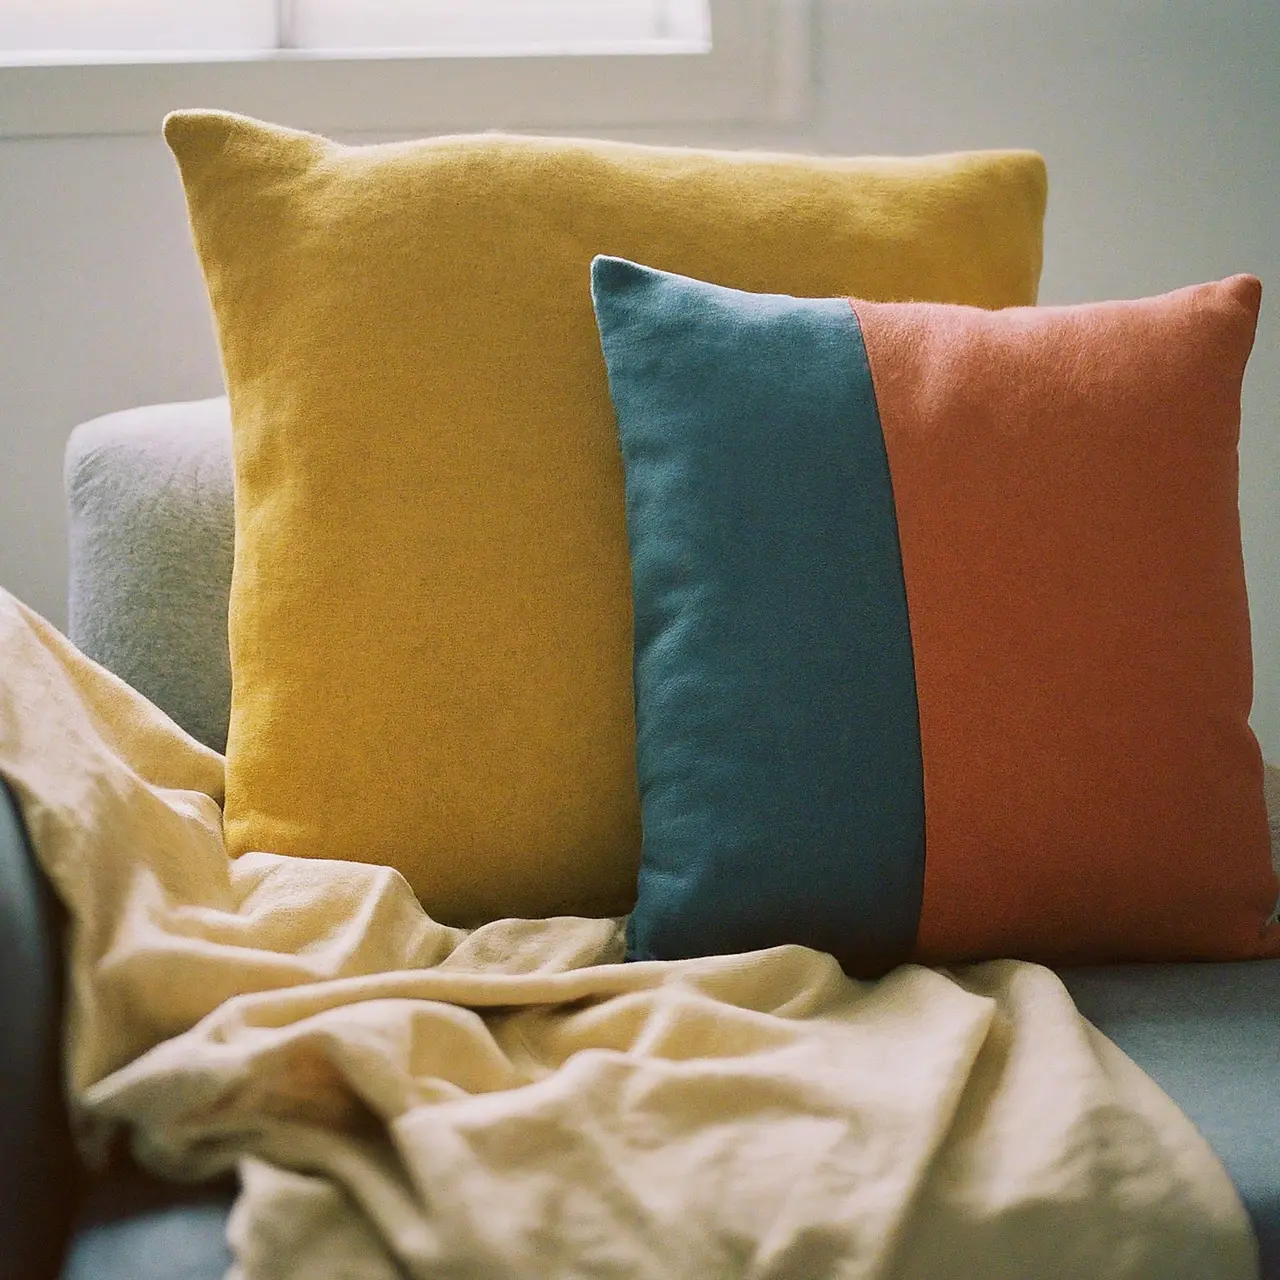 A selection of colorful cotton pillow covers on a couch. 35mm stock photo